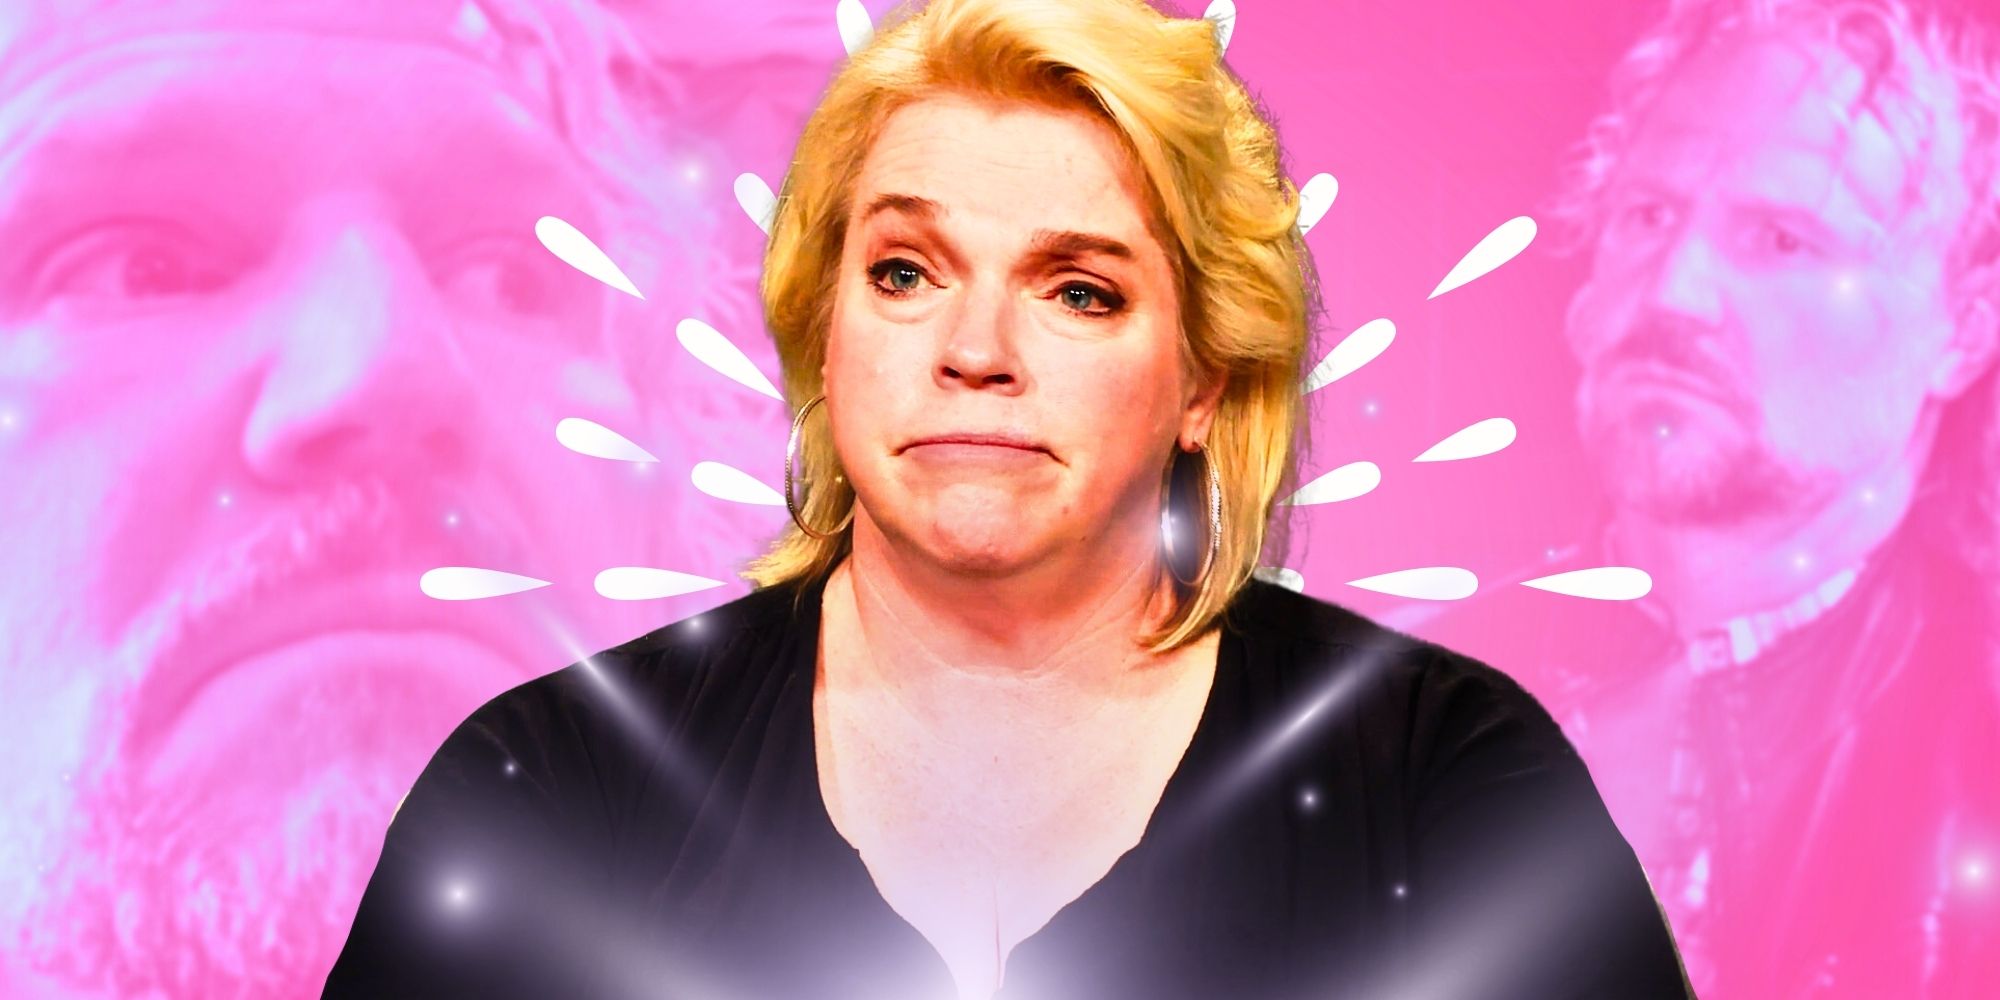 Sister Wives Janelle Brown looking miserable with pink background